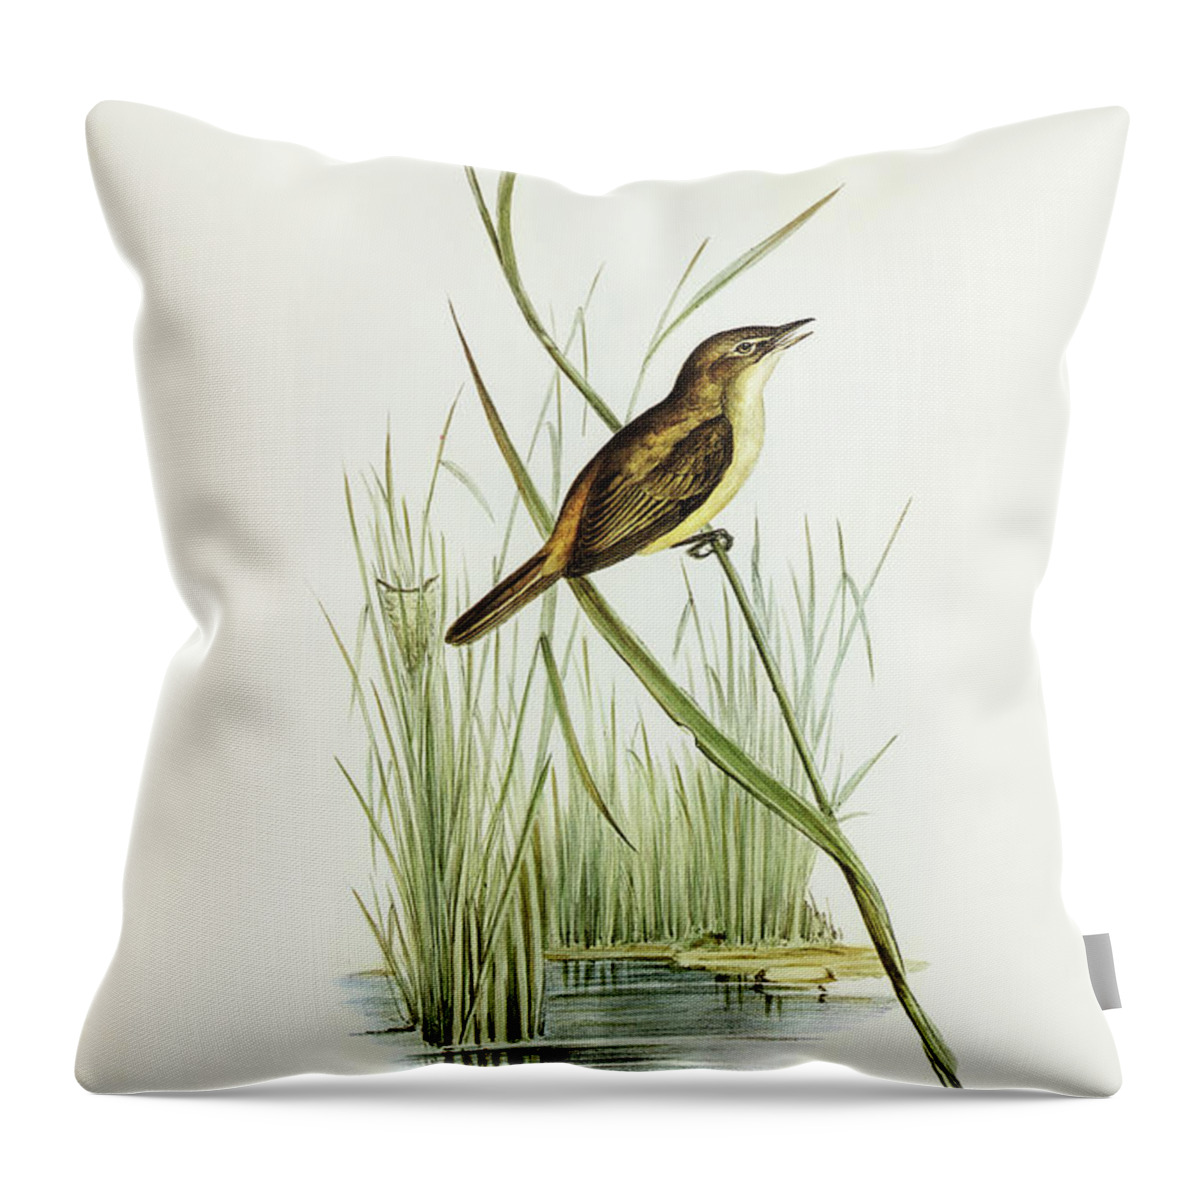 Reed Warbler Throw Pillow featuring the drawing Reed Warbler, Acrocephalus Australis by John Gould